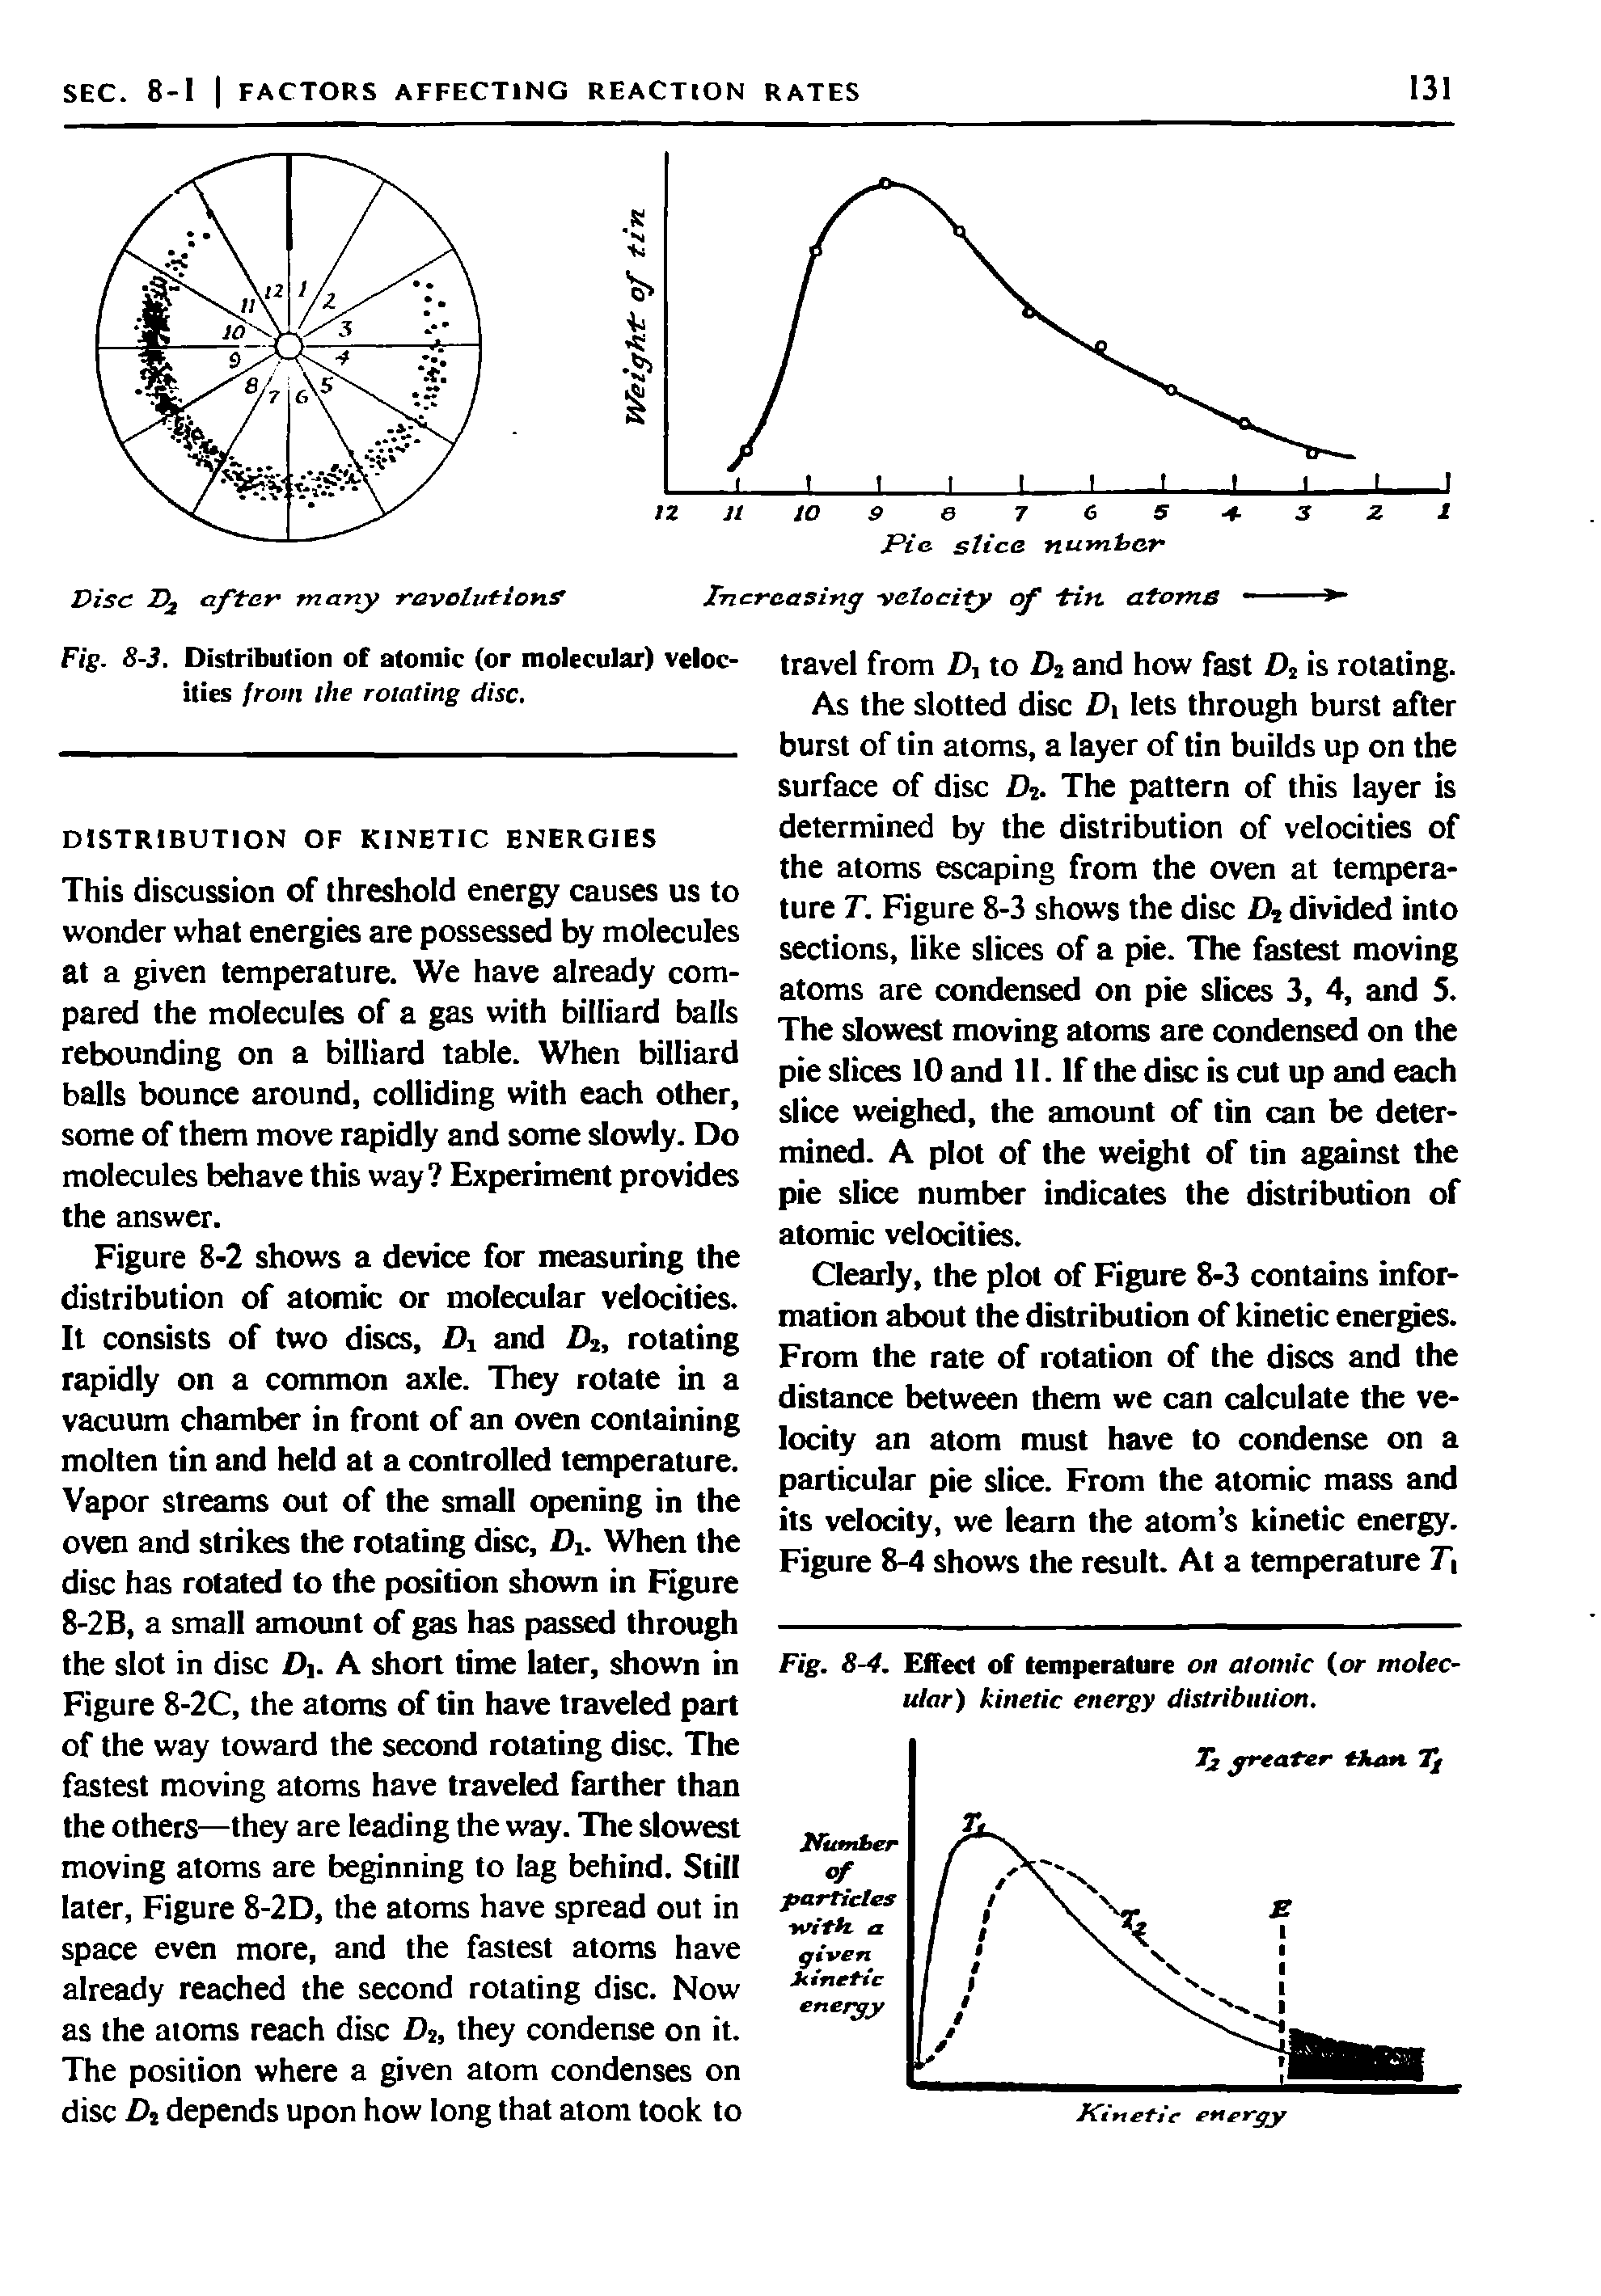 Fig. 8-4. Effect of temperature on atomic (or molecular) kinetic energy distribution.